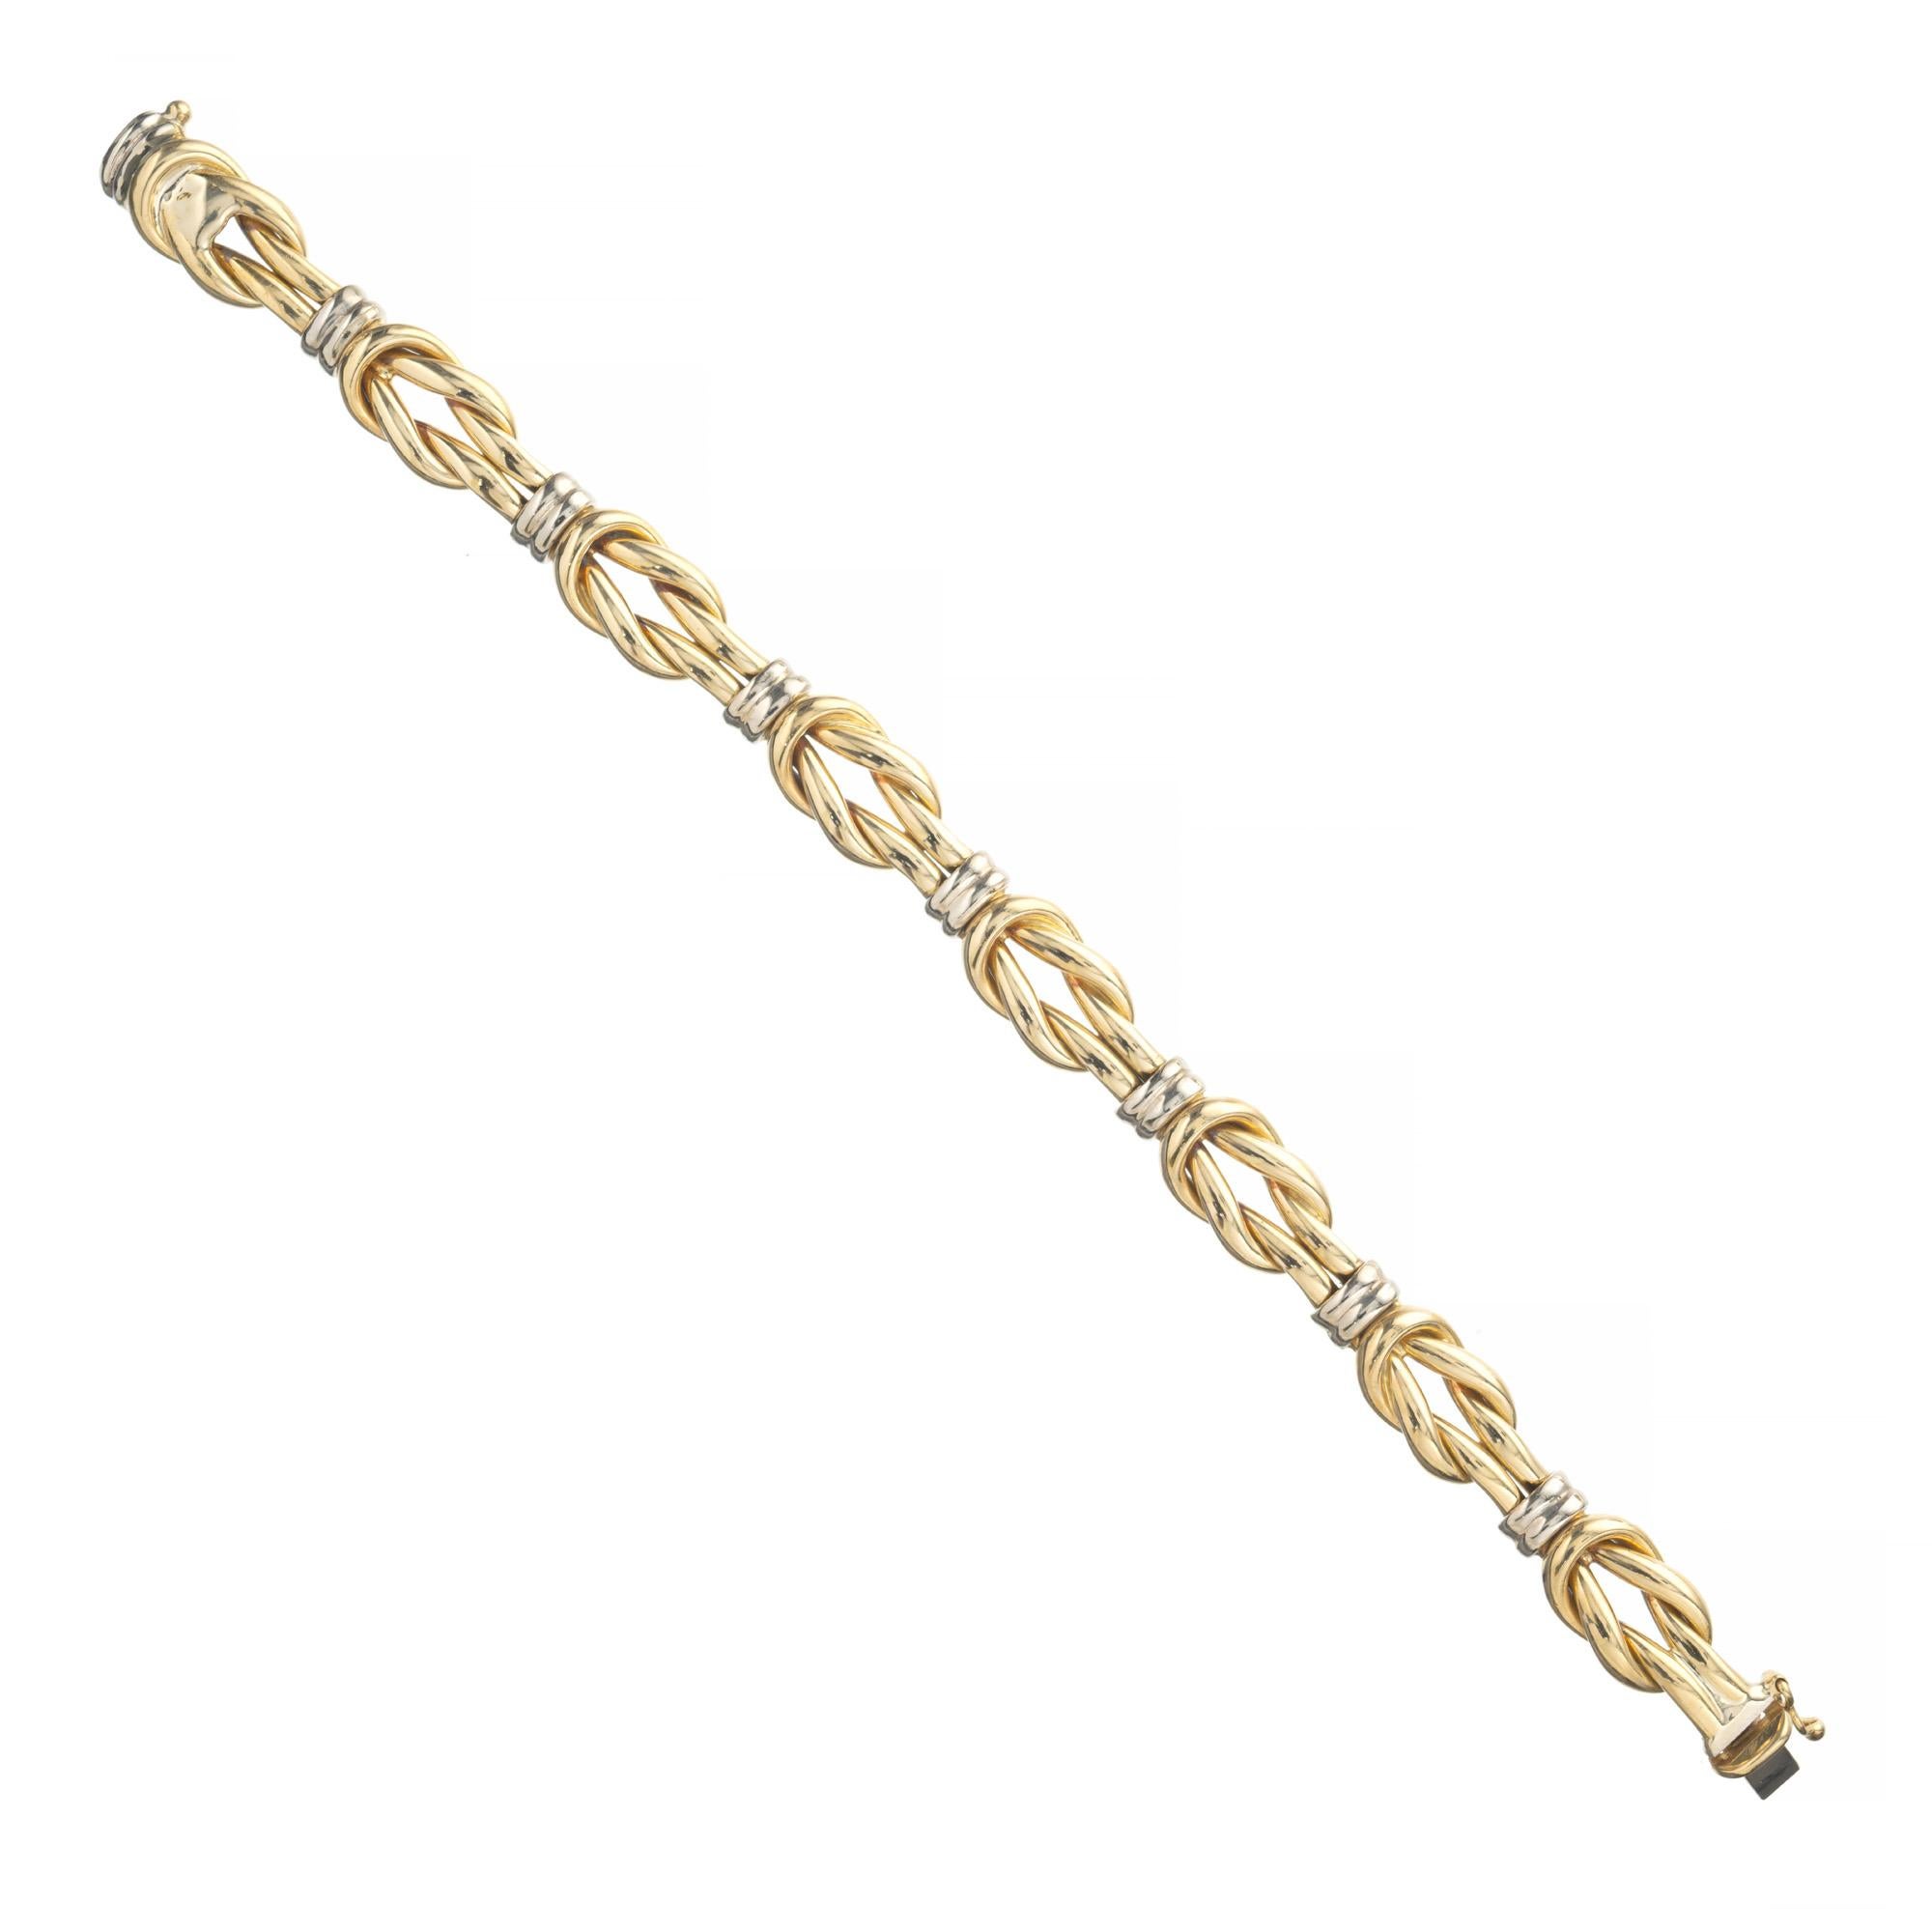 Two Tone Yellow White Gold Italian Knot Bracelet  In Good Condition For Sale In Stamford, CT